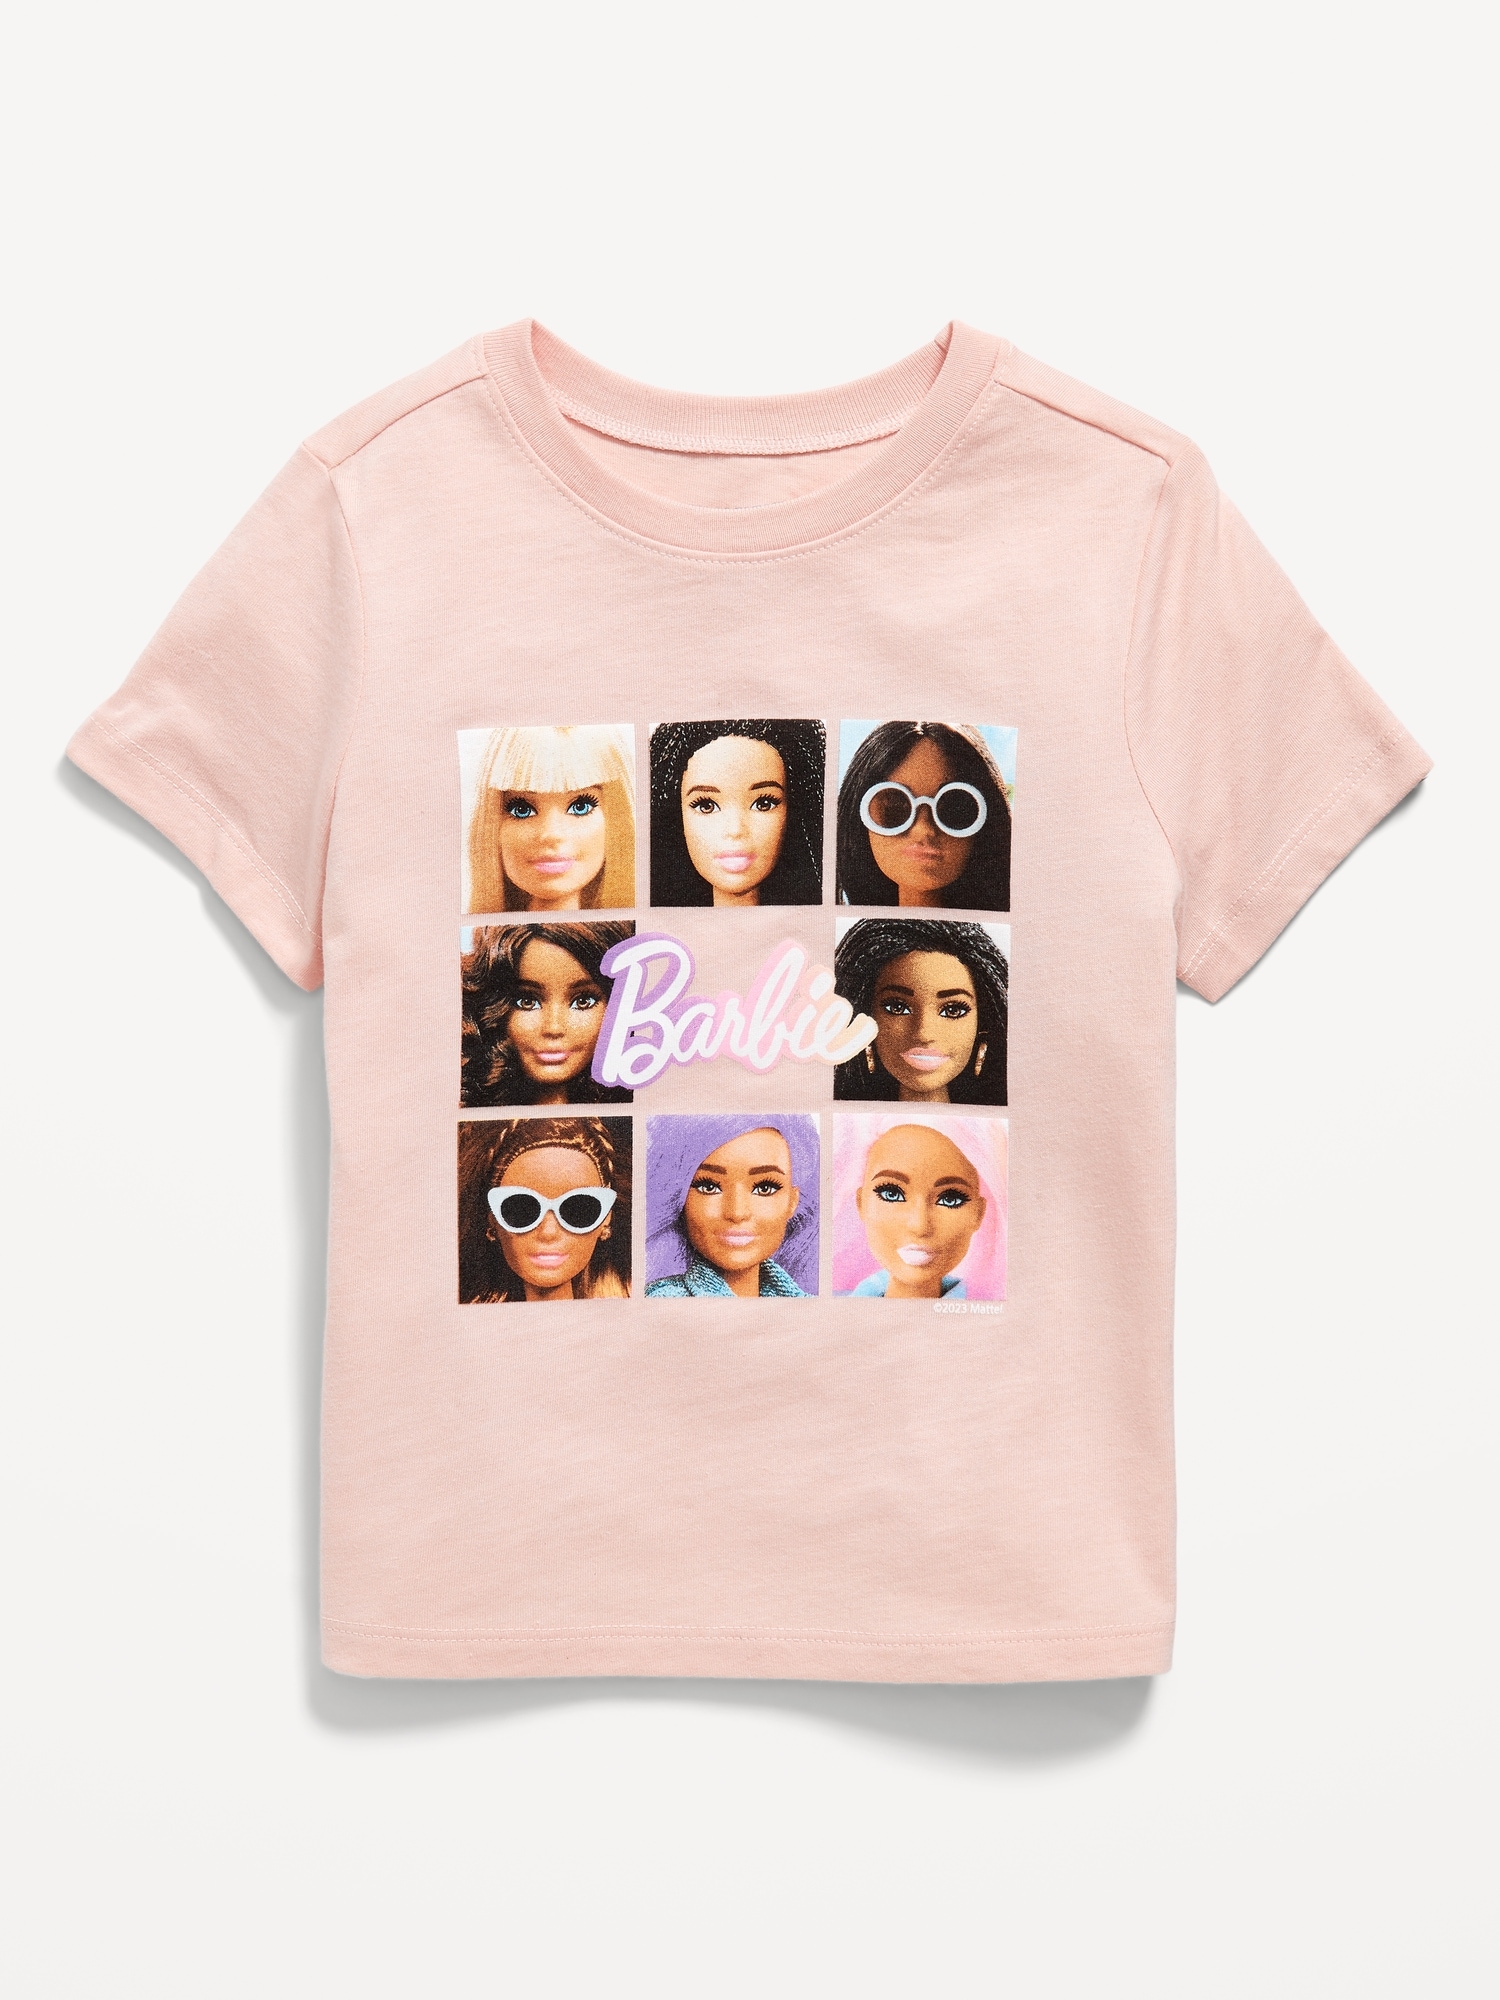 Barbie Graphic T-Shirt for Toddler Girls Hot Deal